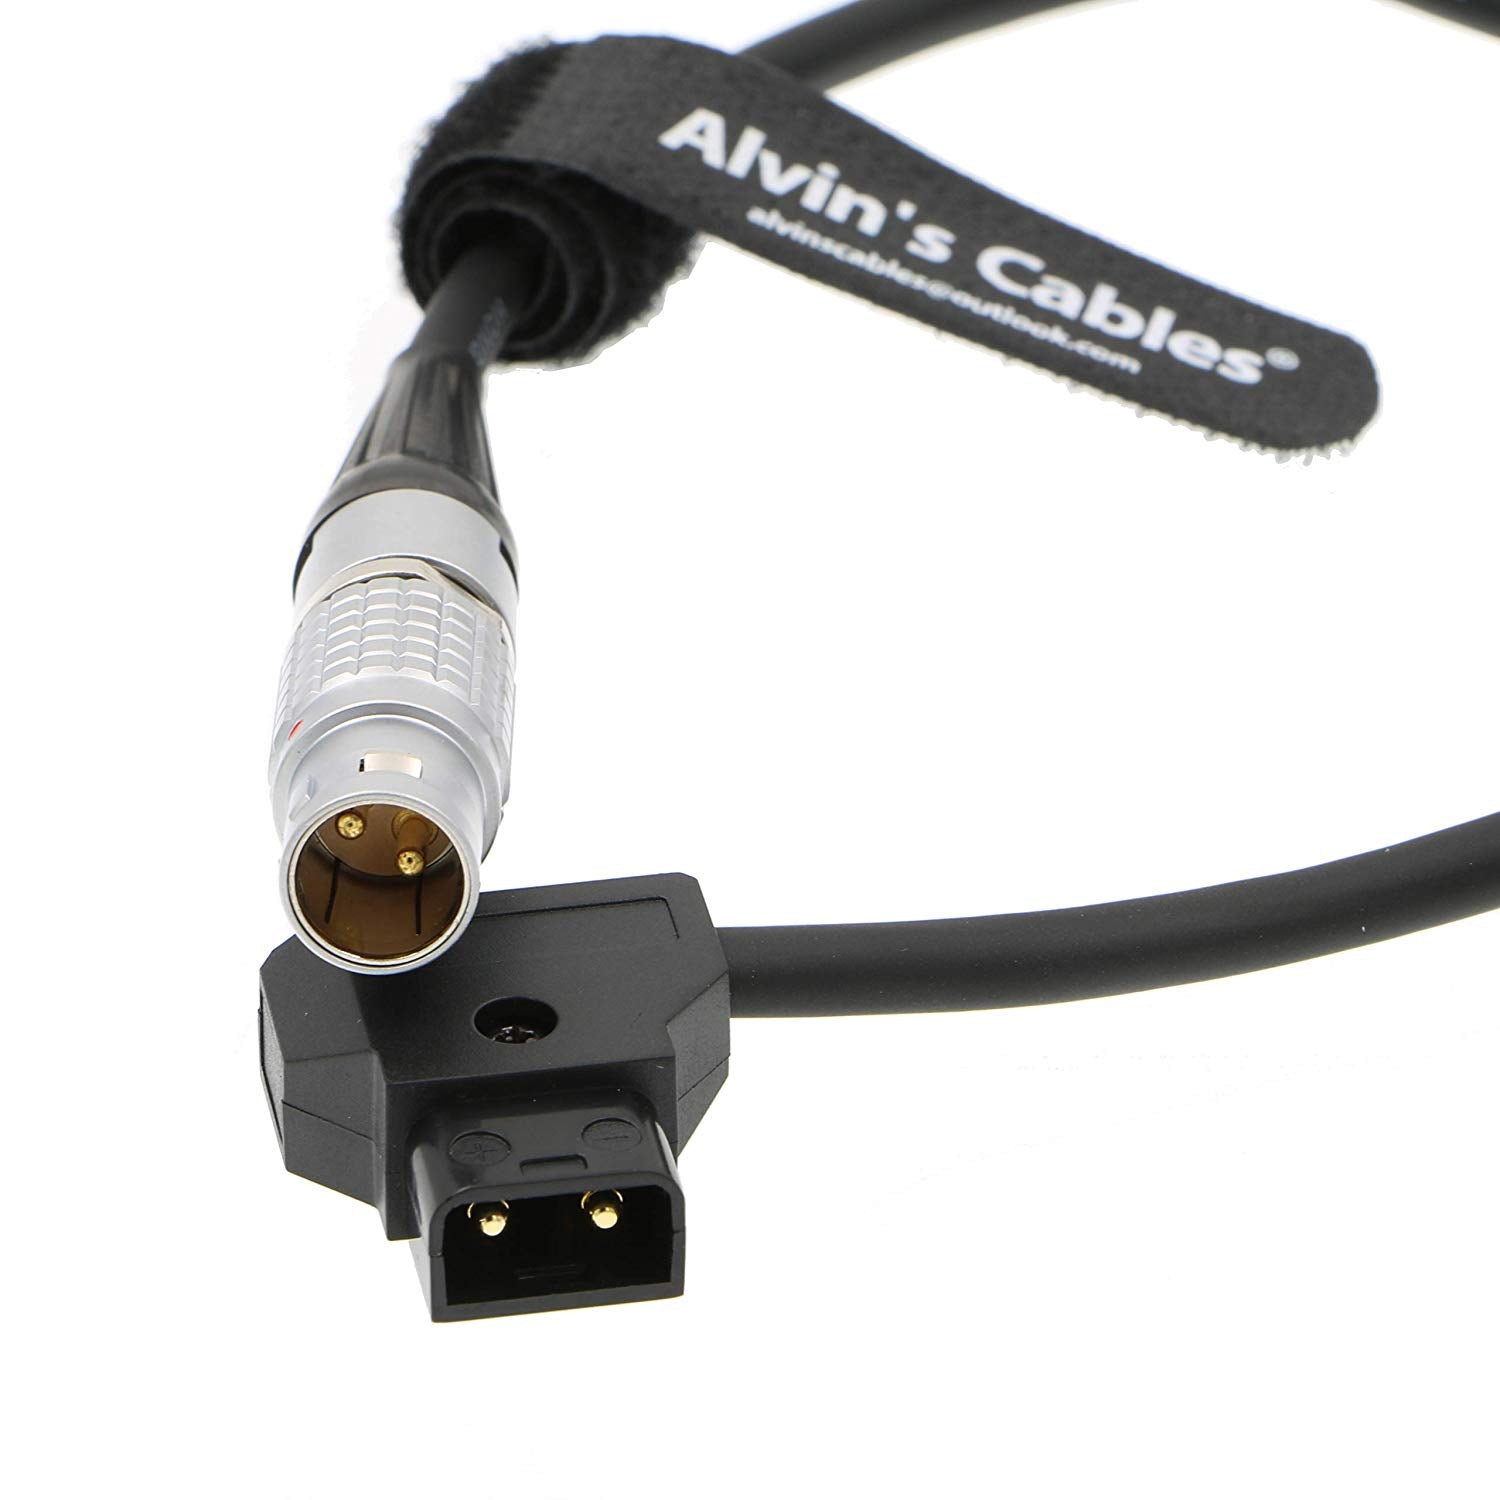 Alvin’s Cables MOVI PRO Power Adapter Cable 2 Pin Male to D-tap